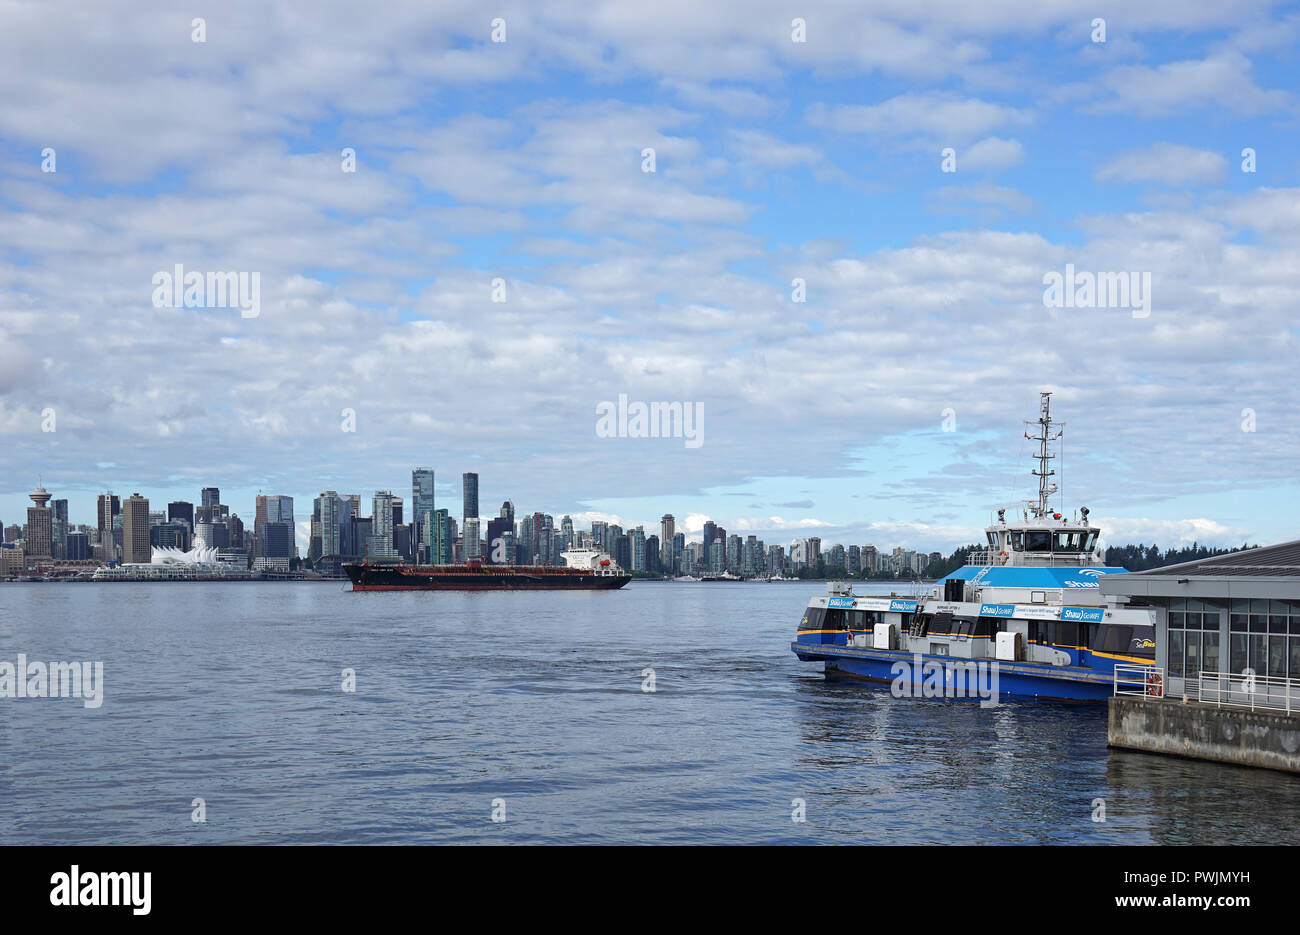 Seabus on the way to downtown Vancouver from the North Shore, Vancouver, BC, Canada Stock Photo